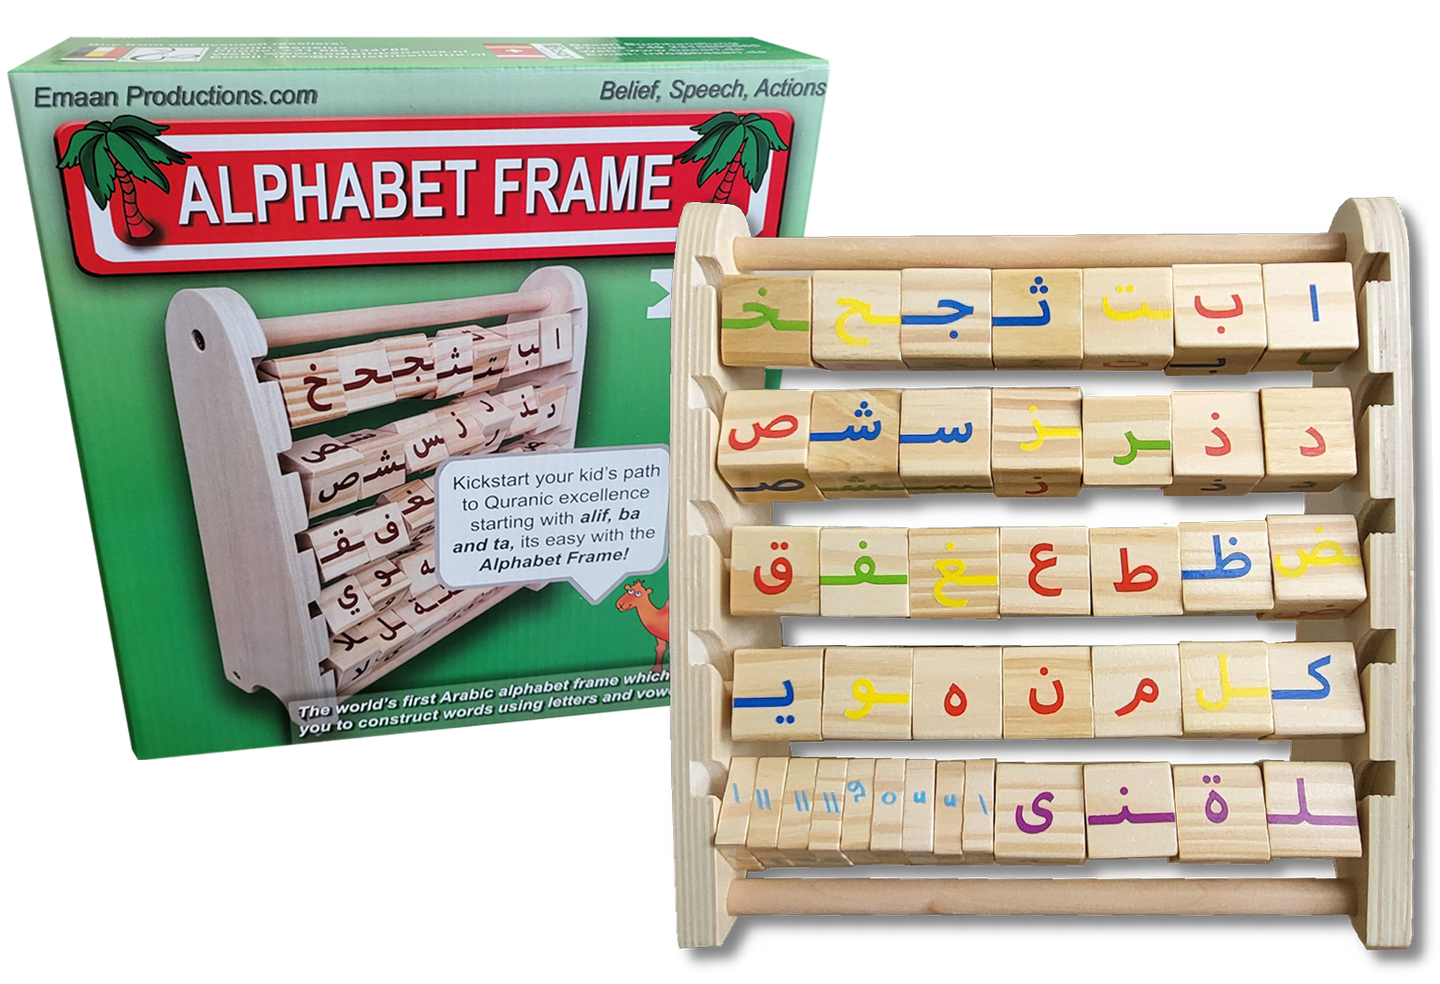 Emaan Productions: Alphabet Frame XL